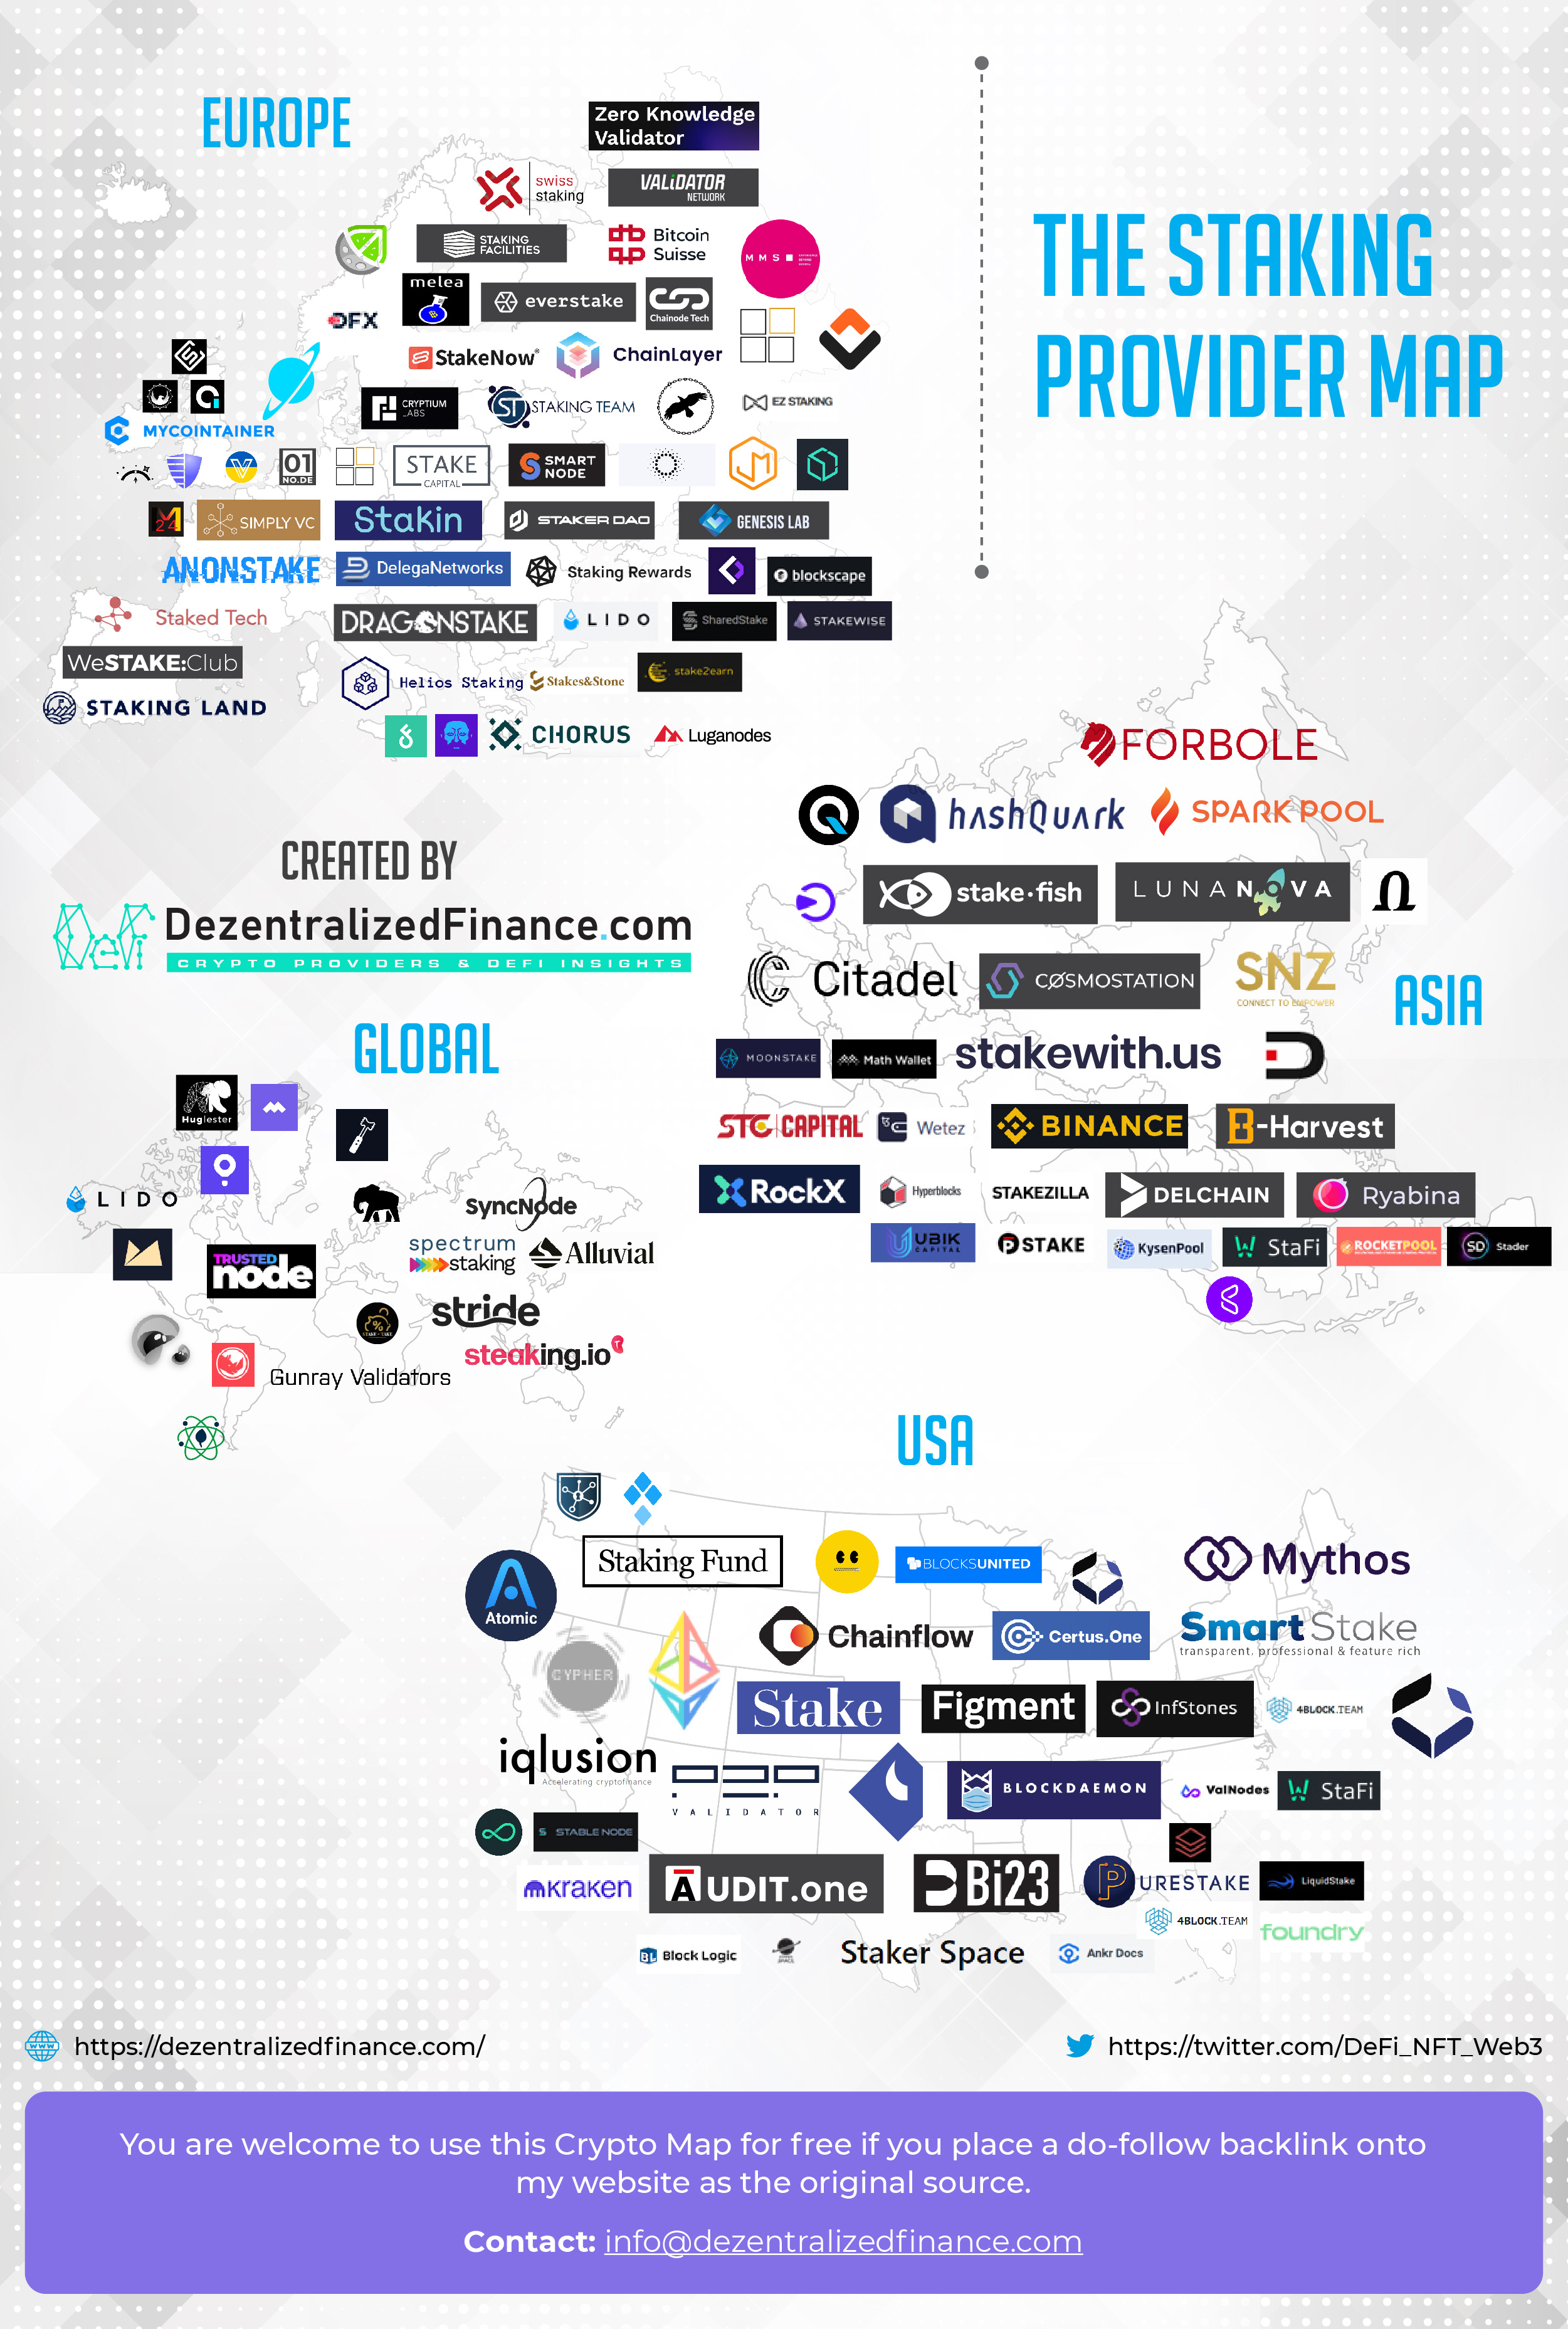 Staking Provider Map